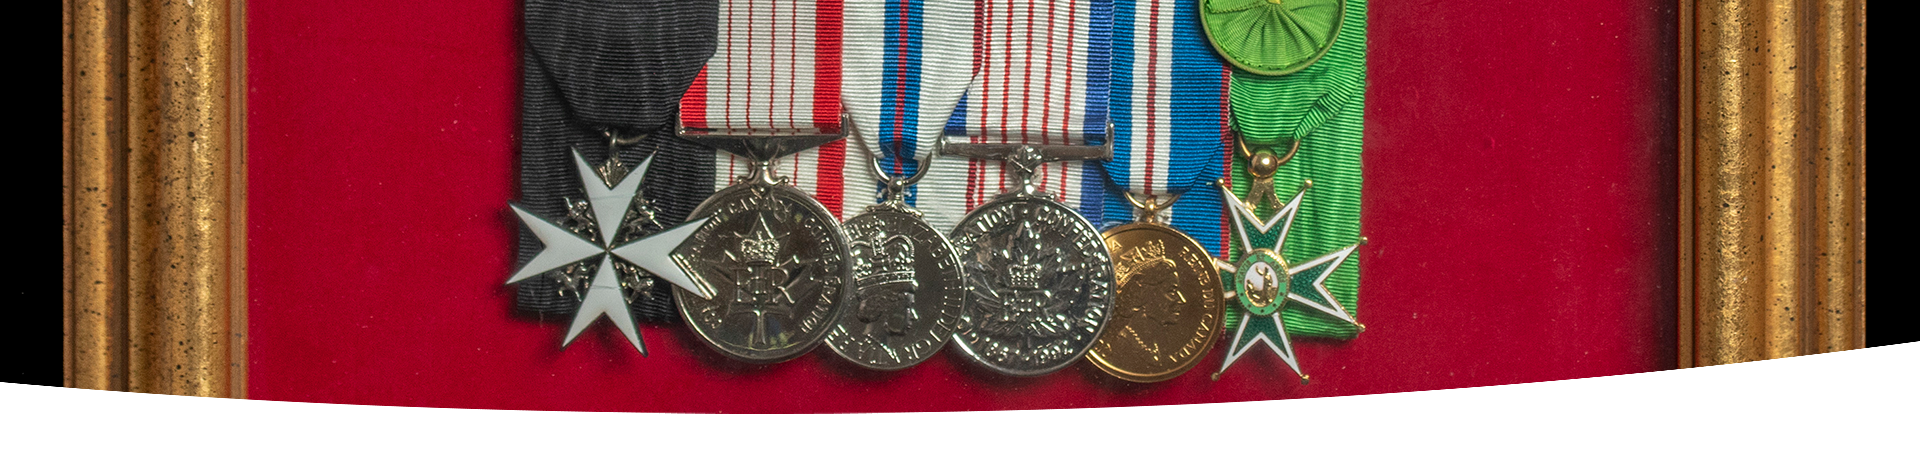 A close-up of a set of medals displayed in a picture frame.